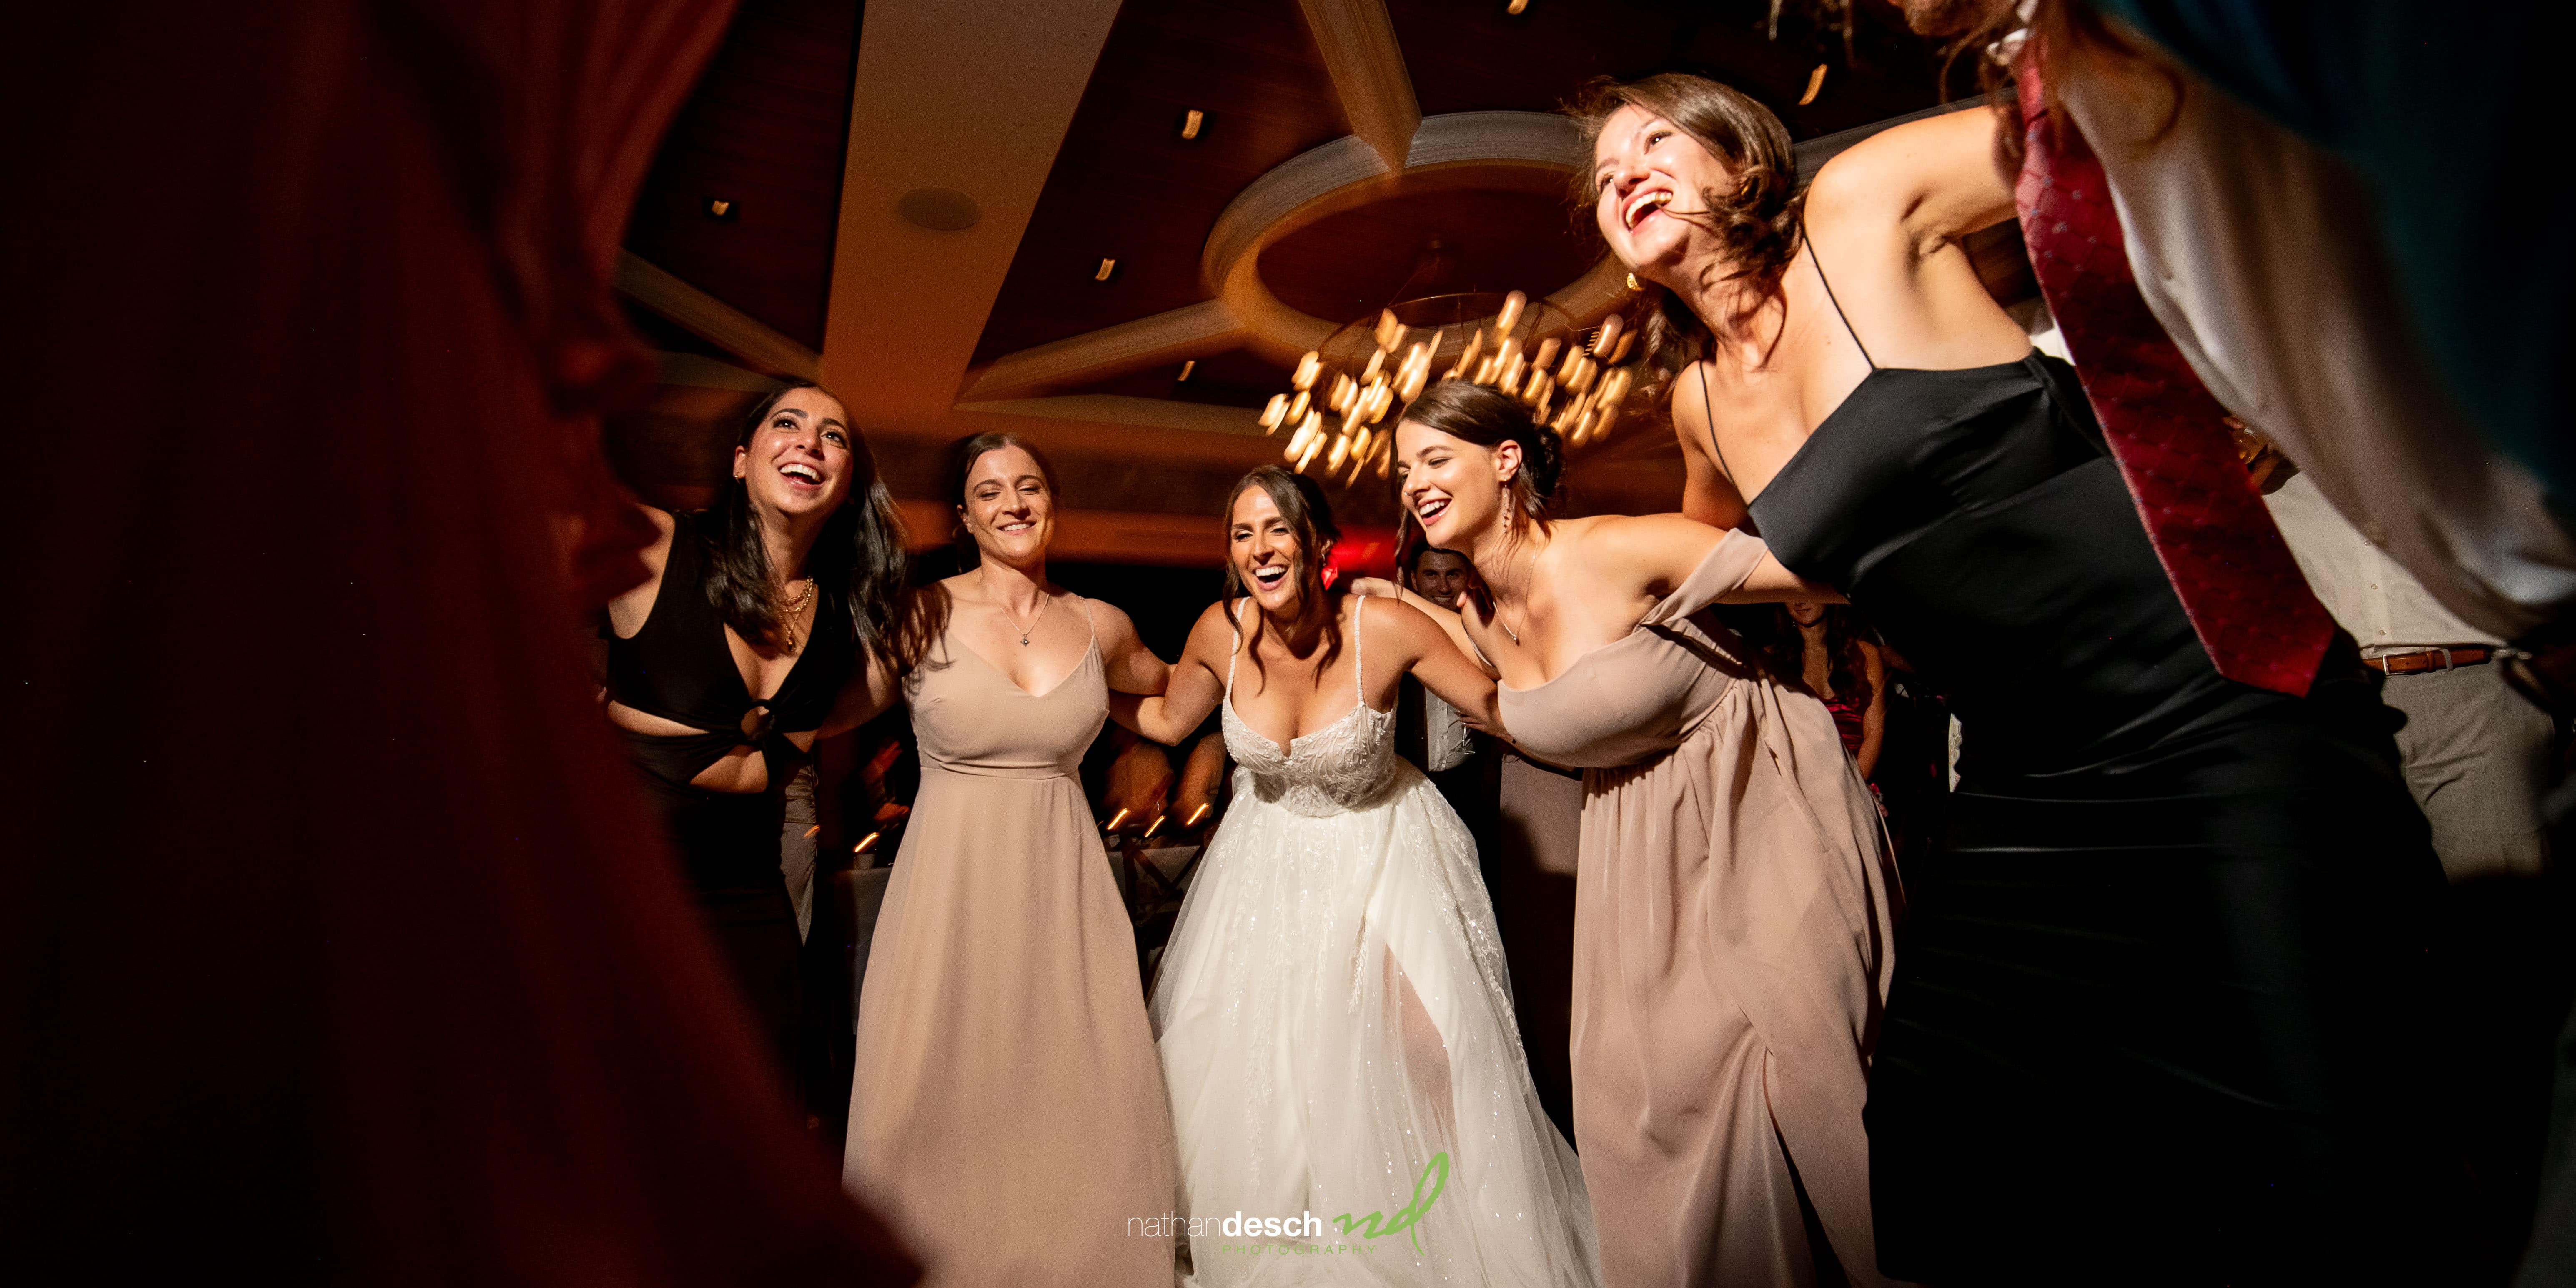 Bride dancing with Friends